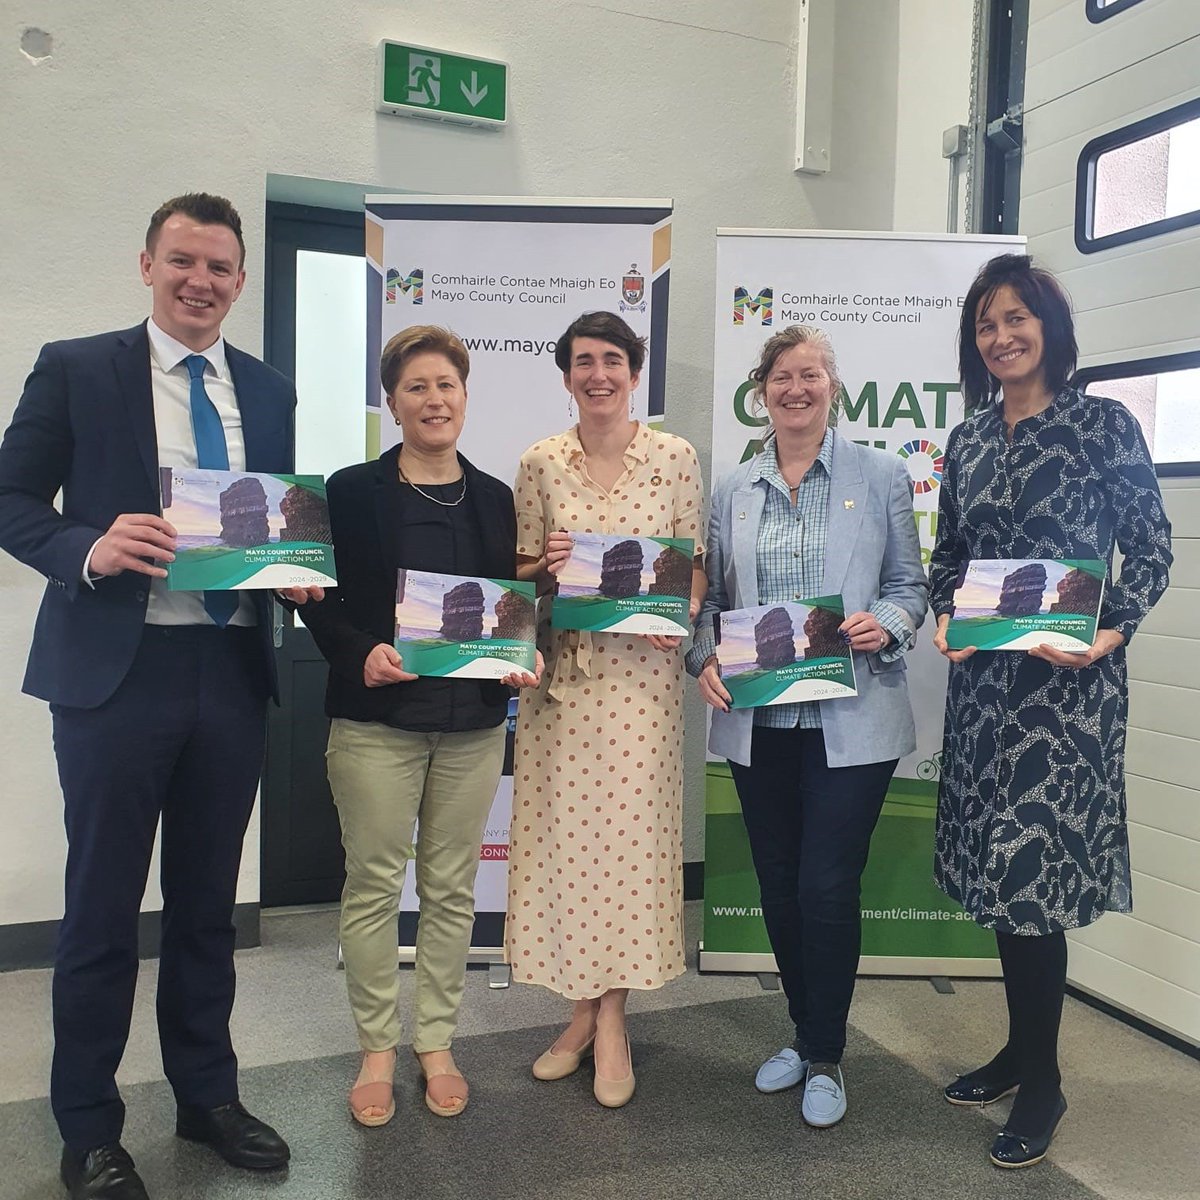 At the launch of @MayoCoCo Climate Action Plan were Dr Deirdre Garvey, Head of Department, and Dr Margaret O'Riordan. Delighted to meet @atu_ie Mayo graduates Cllr @markduffymayo and @GeorgieMacPorge. @ATU_GalwayCity @OFlynnATU @justinkerr123